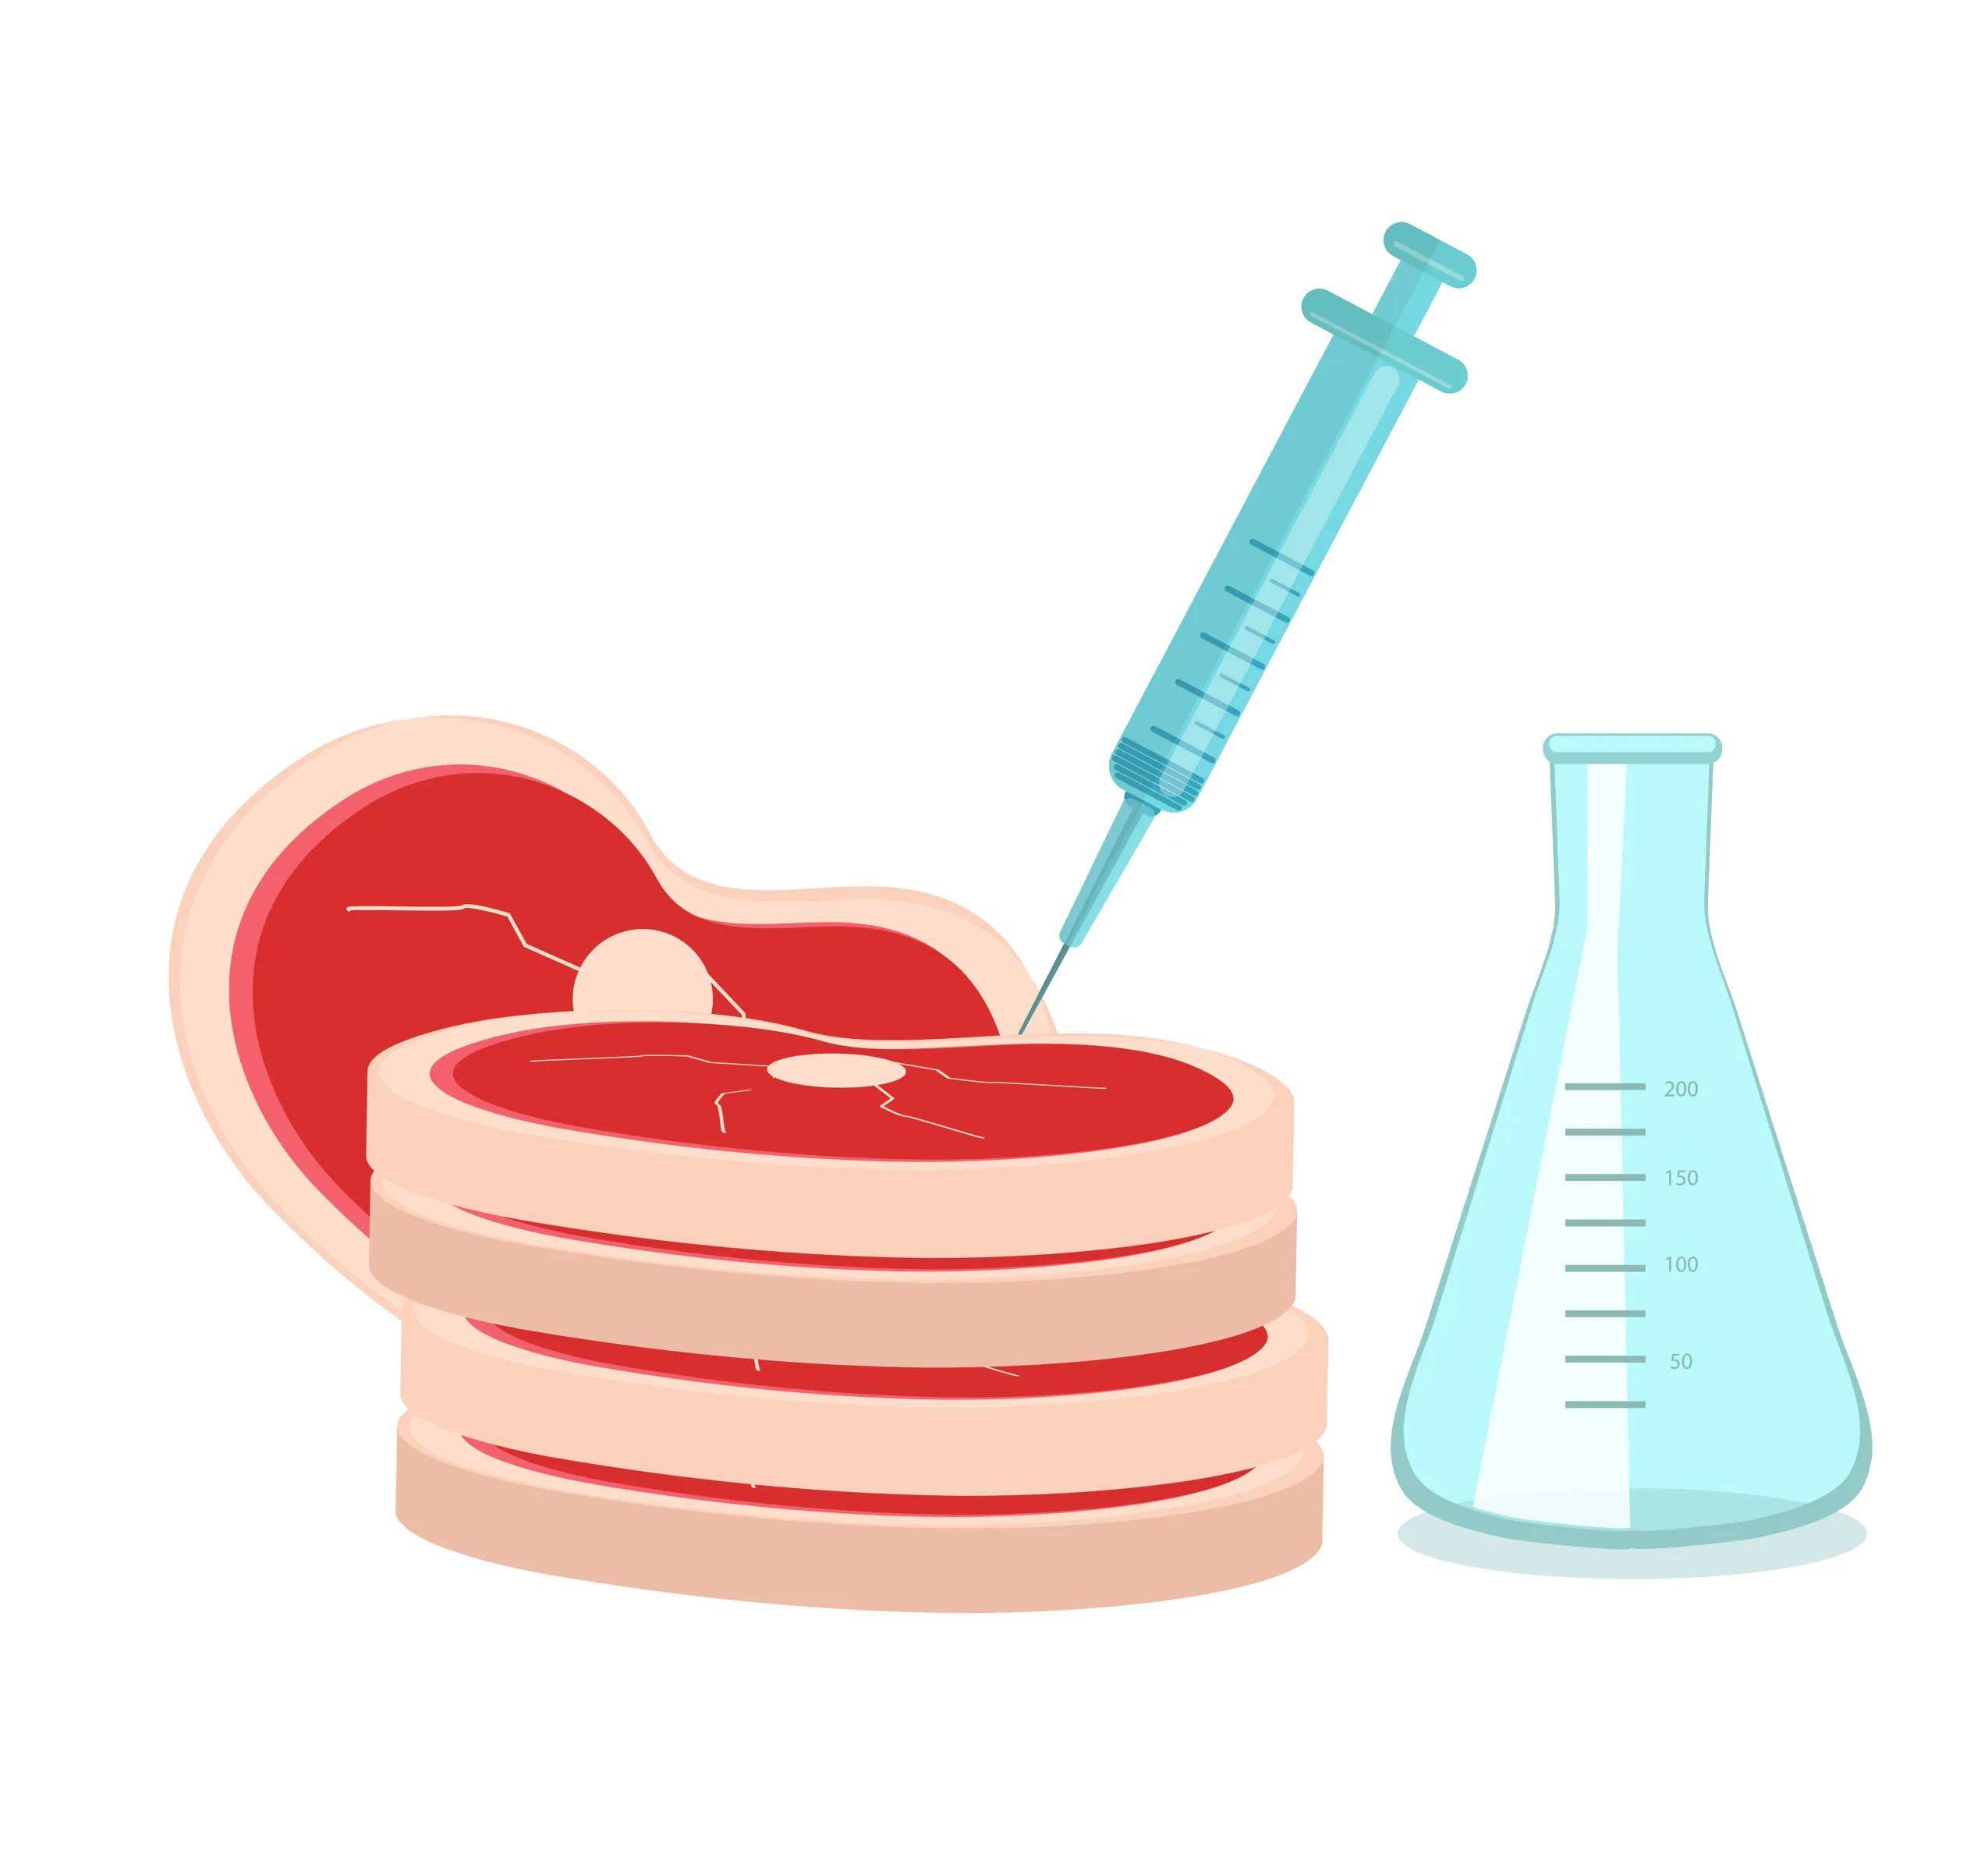 Illustration. Syringe pointed at some meatcuts and laboratory bottle. 